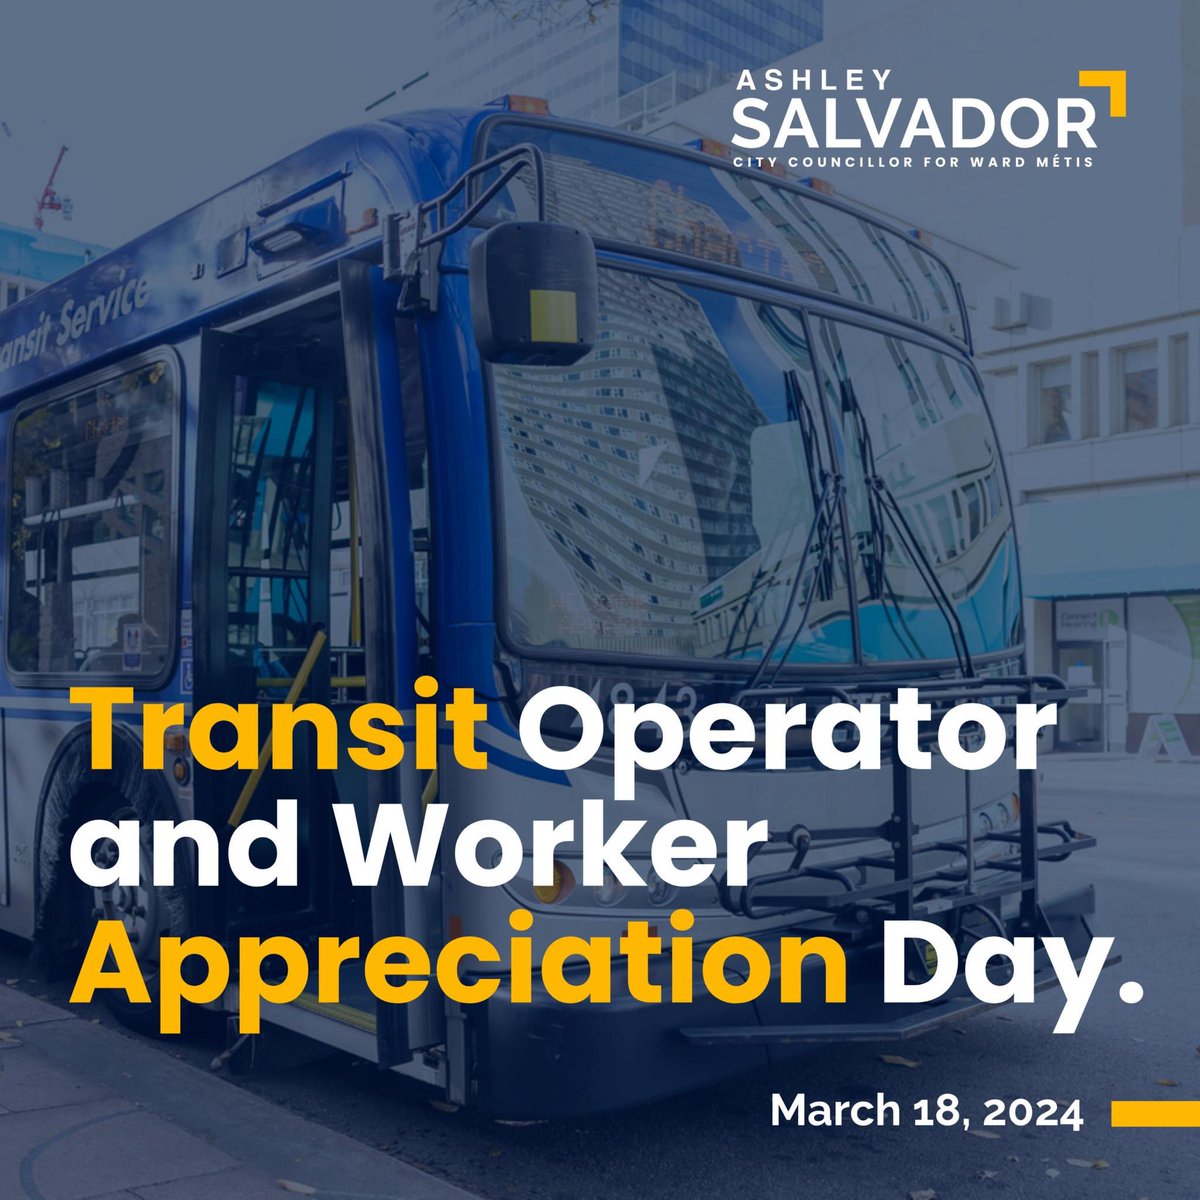 Our daily journeys are powered by the hard work of everyone from operators, to maintenance crews, to transit officers and cleaners. Thank you for your dedication to keeping us moving safely and efficiently. Happy Transit Operator and Worker Appreciation Day🚏🚍🚉 #yeg #WardMétis